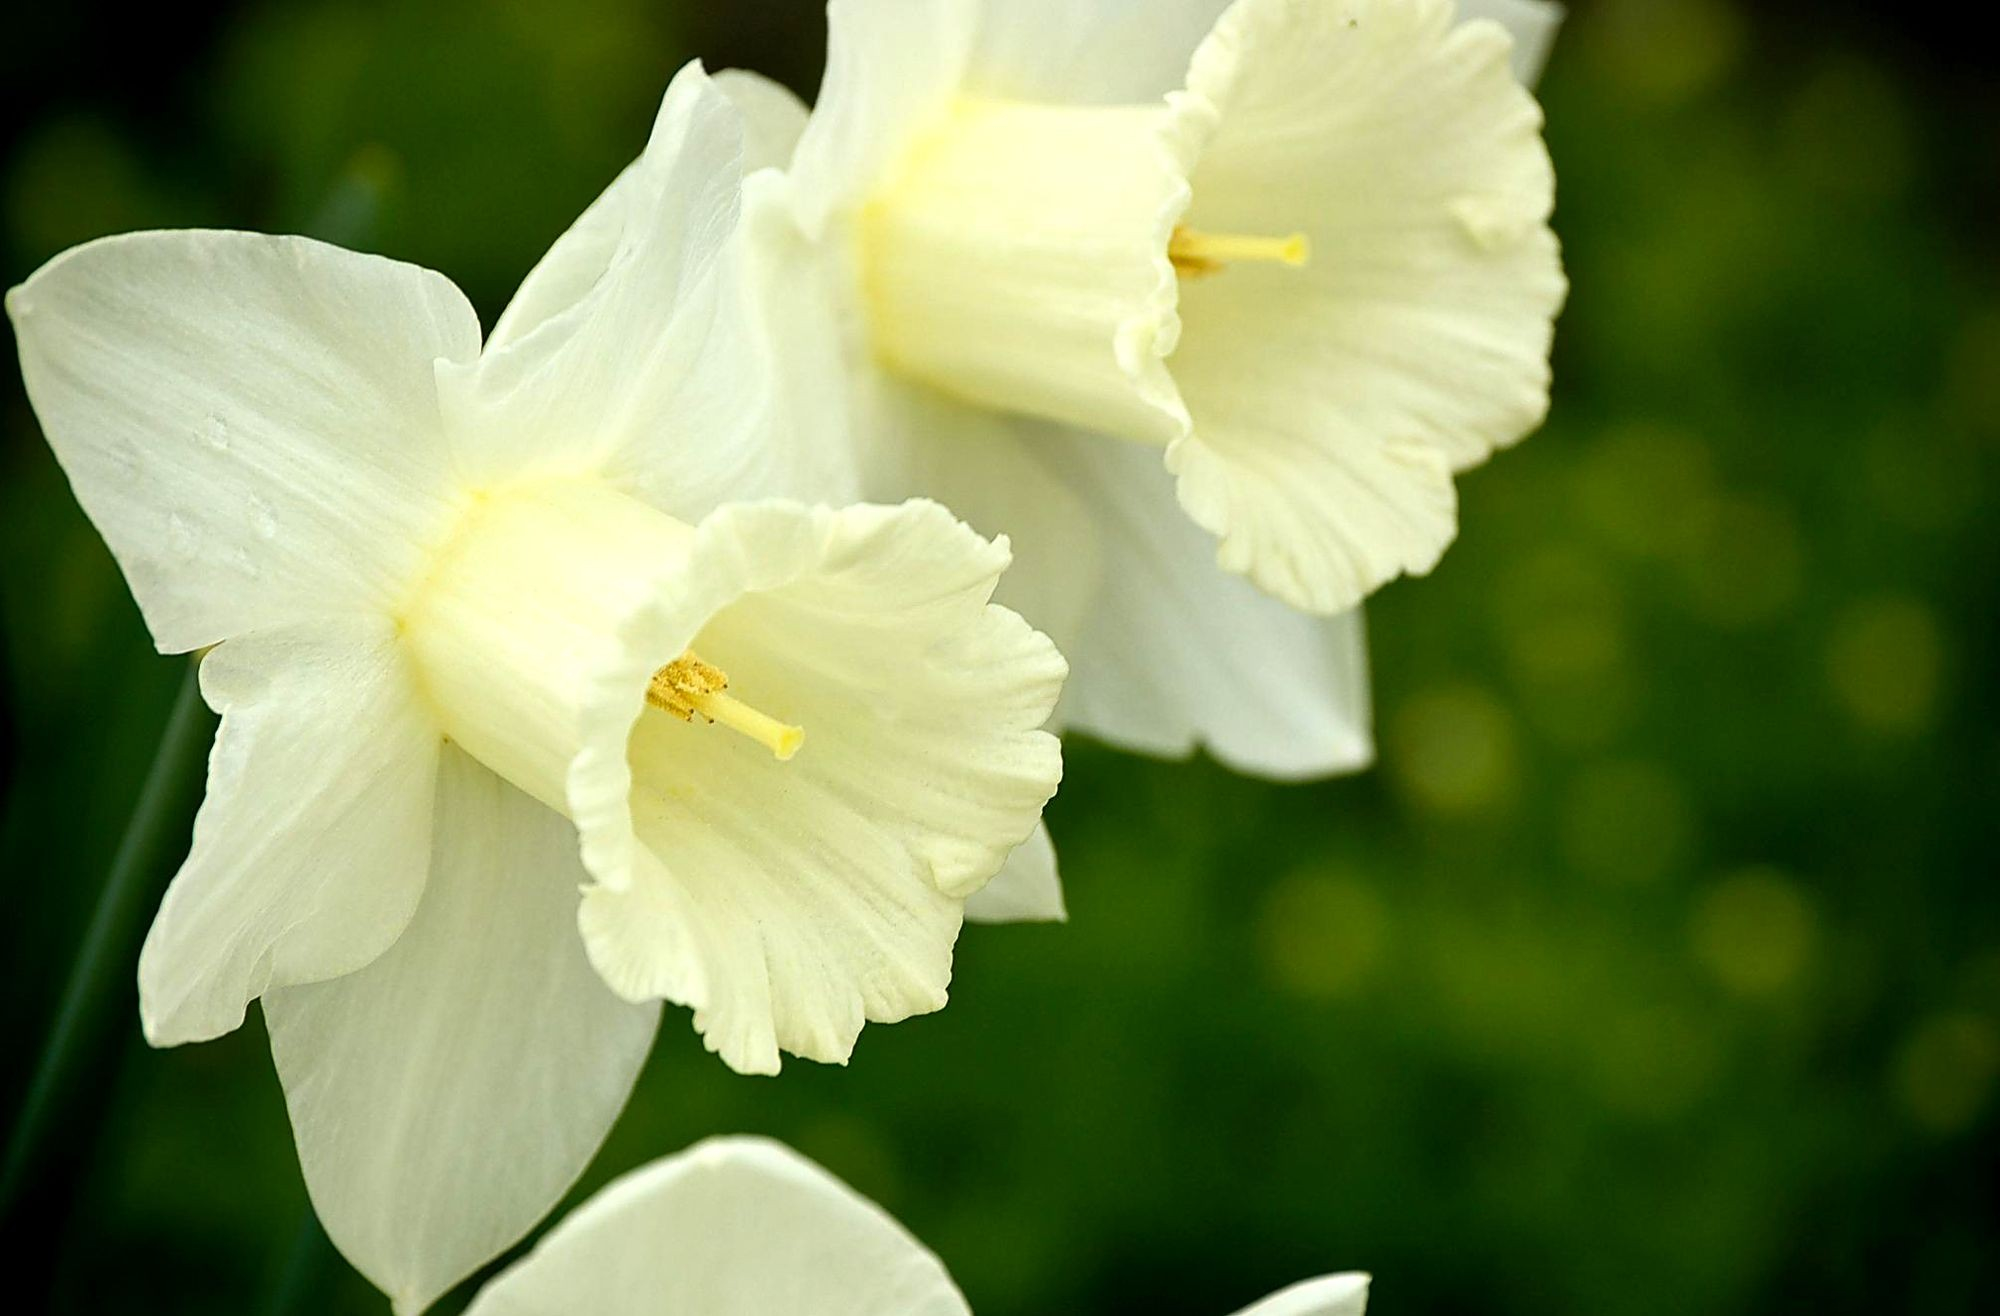 daffodil, earth, close up, flower, narcissus, white flower, flowers